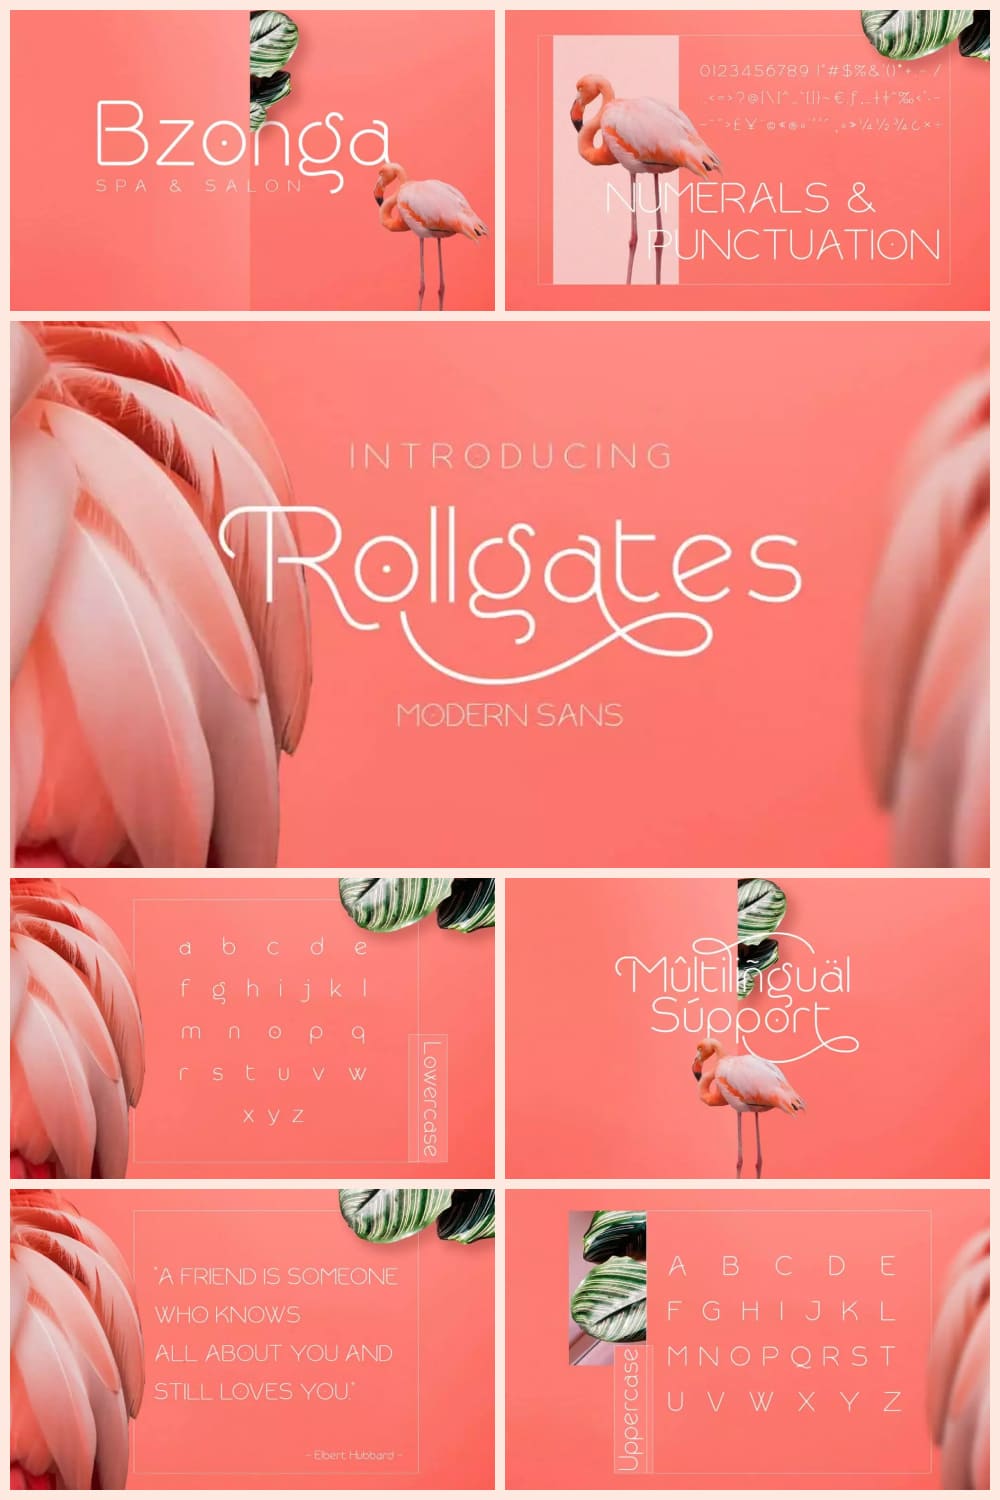 White text on pink background with flamingos.